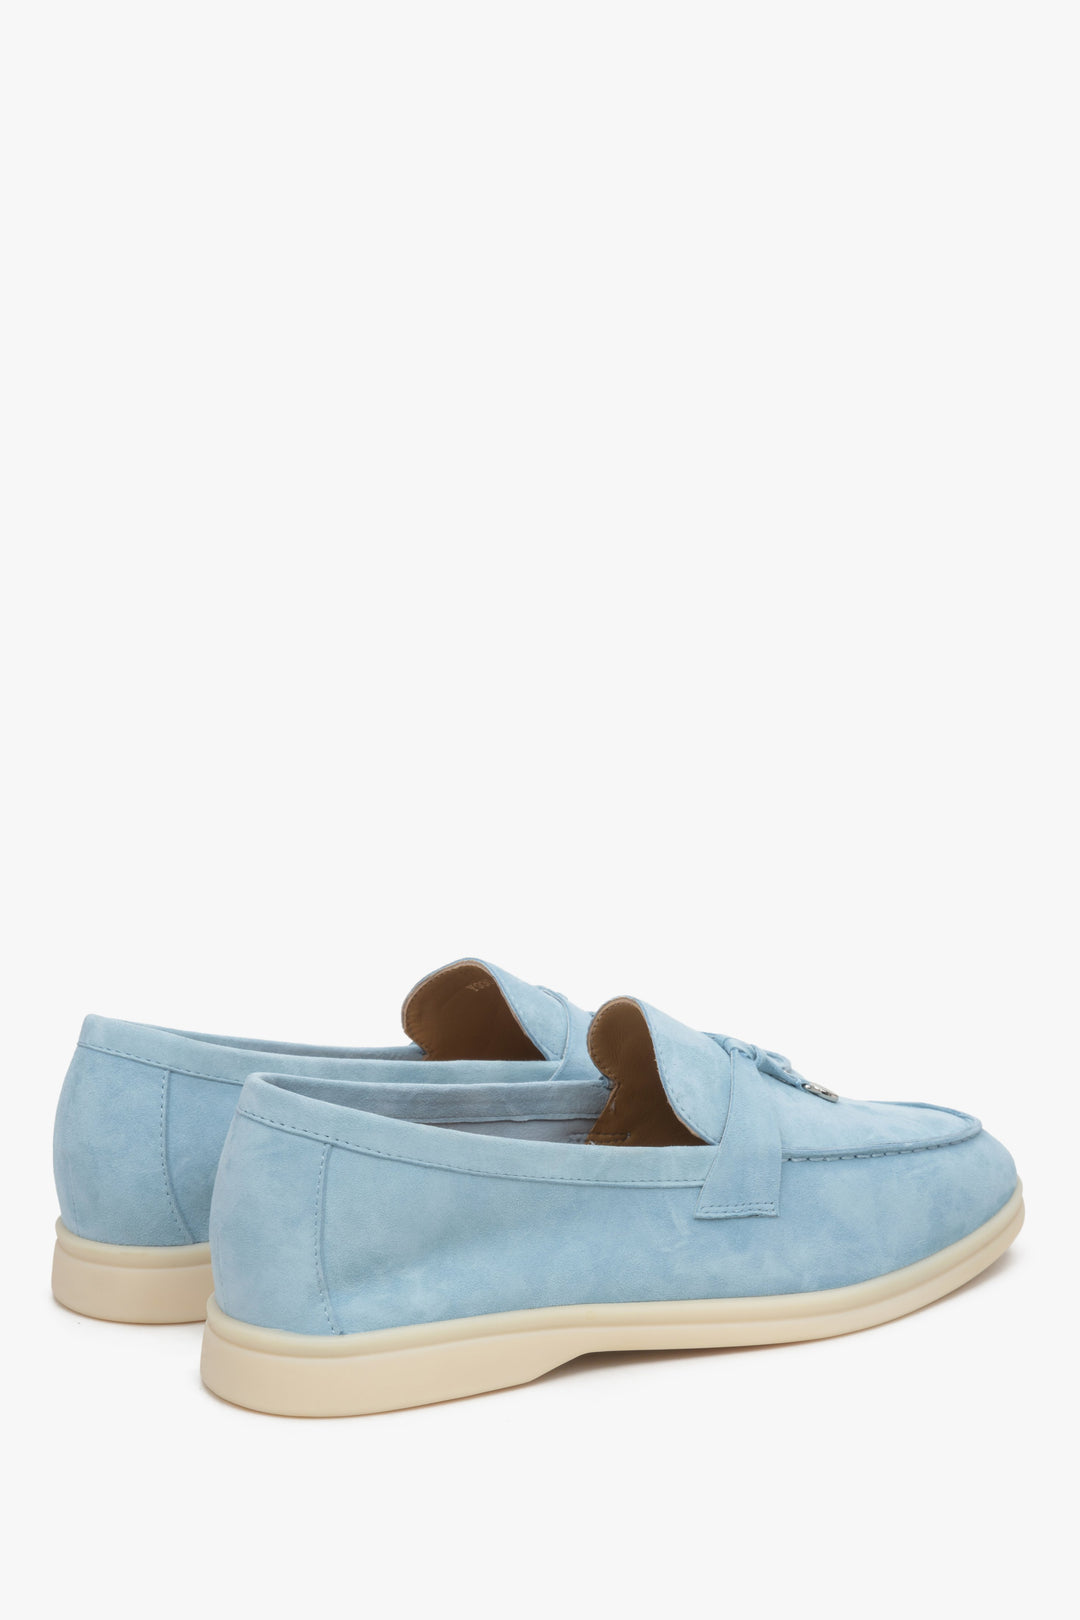 Light blue women's loafers made of natural velour and leather - close up on heel counter.